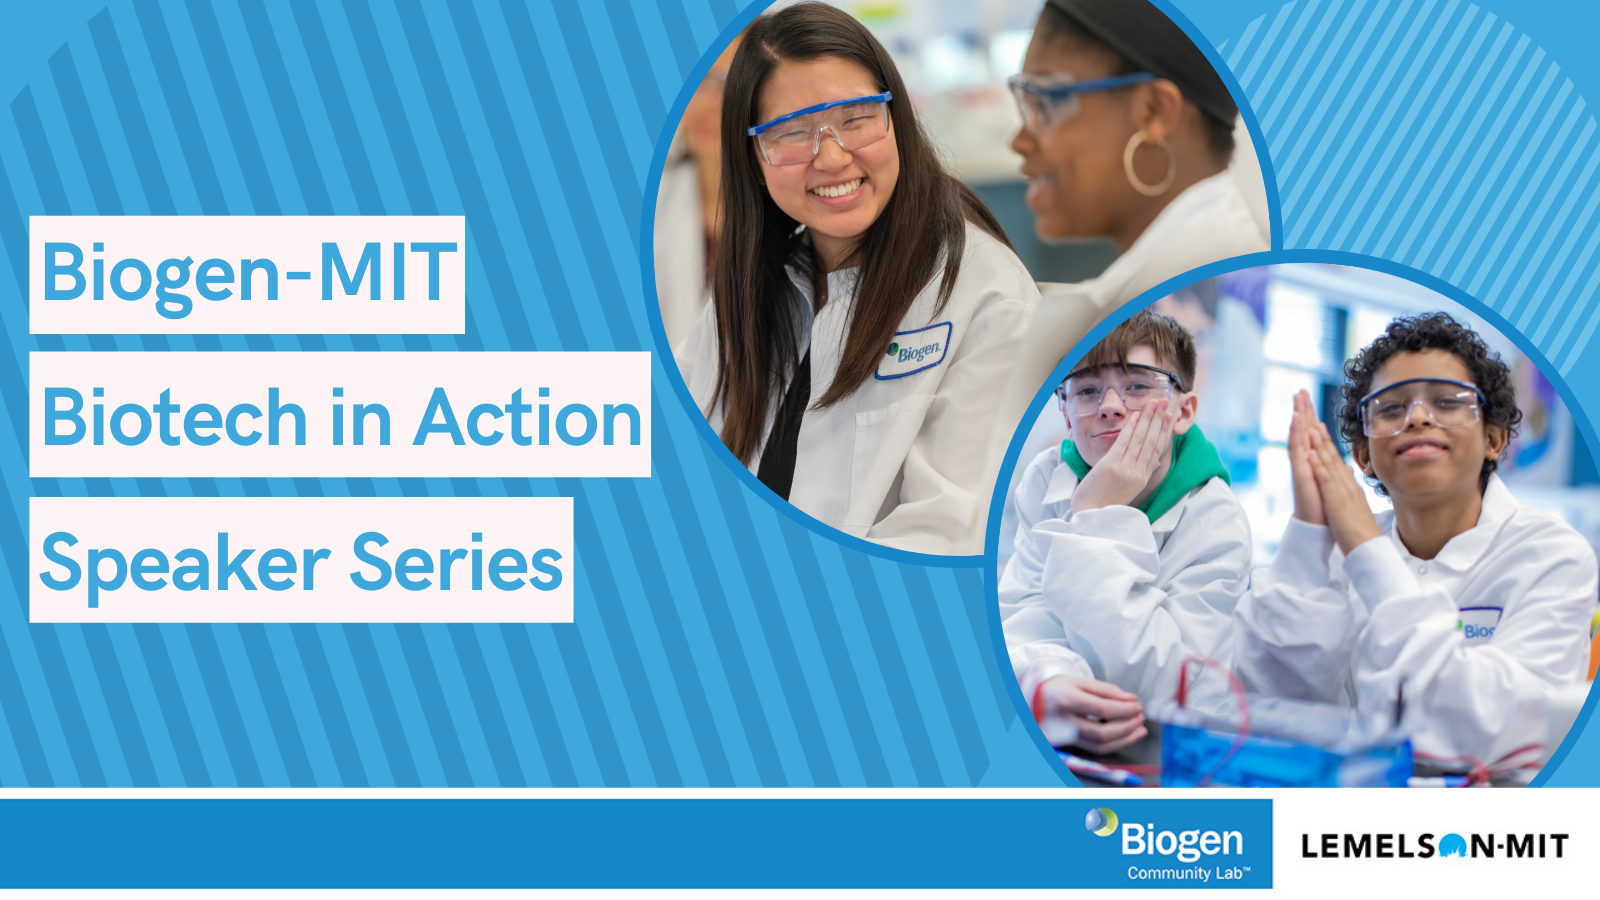 Biogen-MIT BioTech in Action Speaker Series banner with photos of young students in the lab